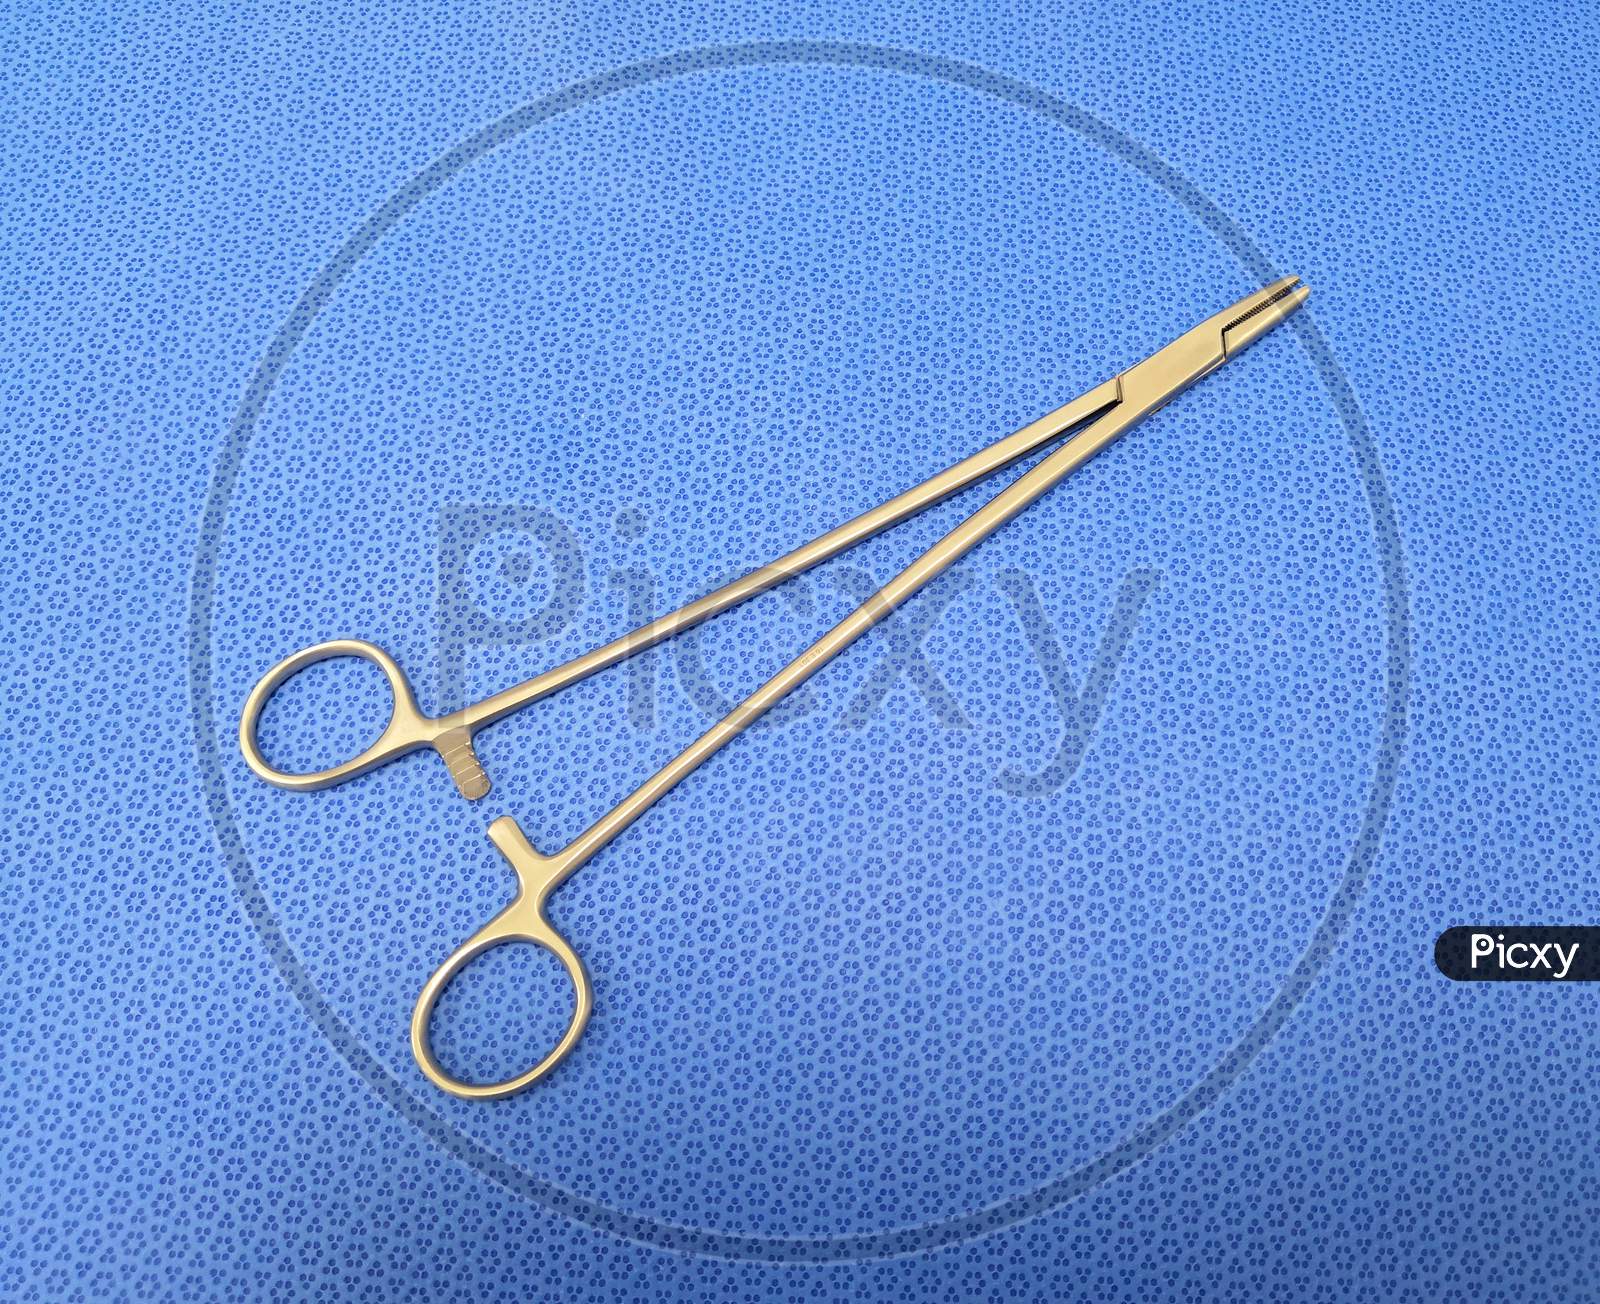 Closeup Picture Of Needle Holder Using For Suturing